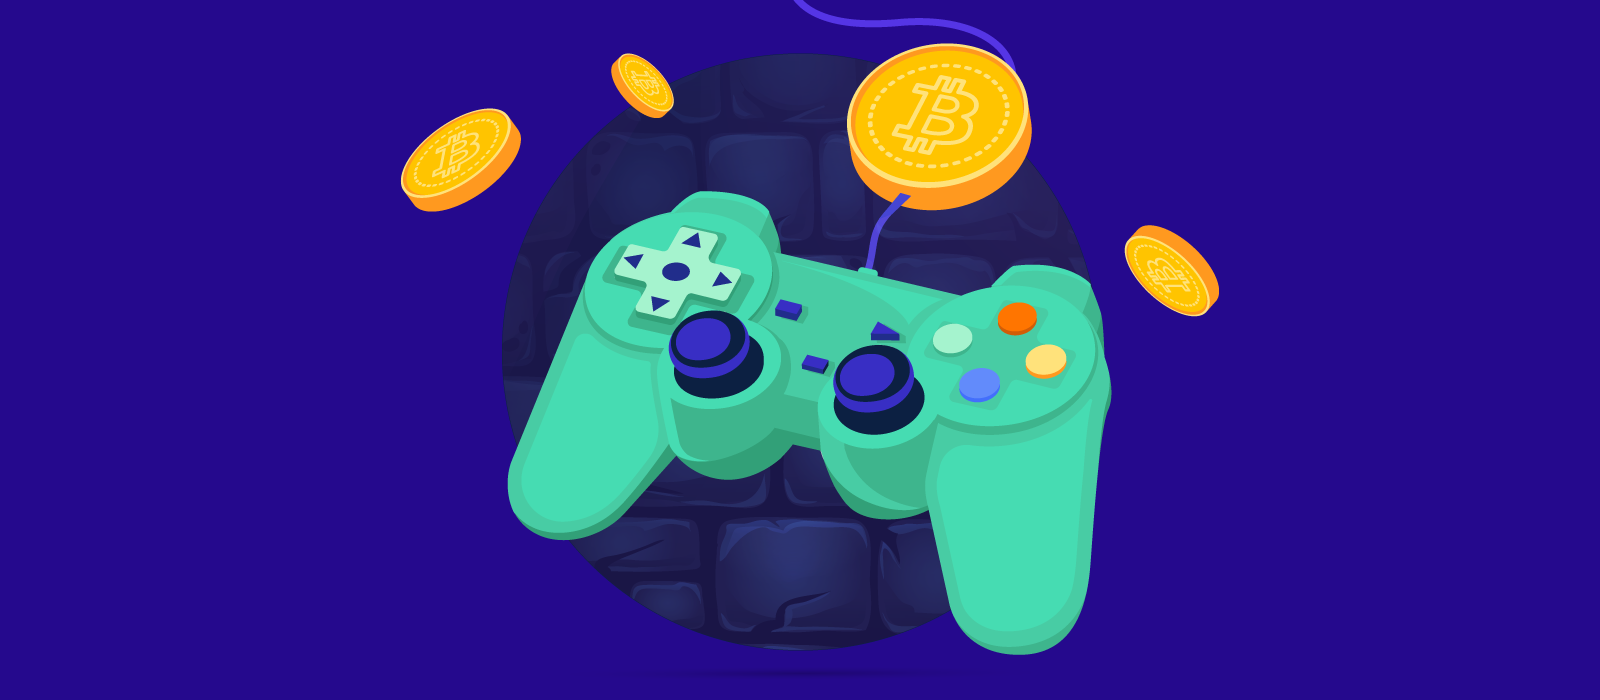 A gamepad and tokens around it